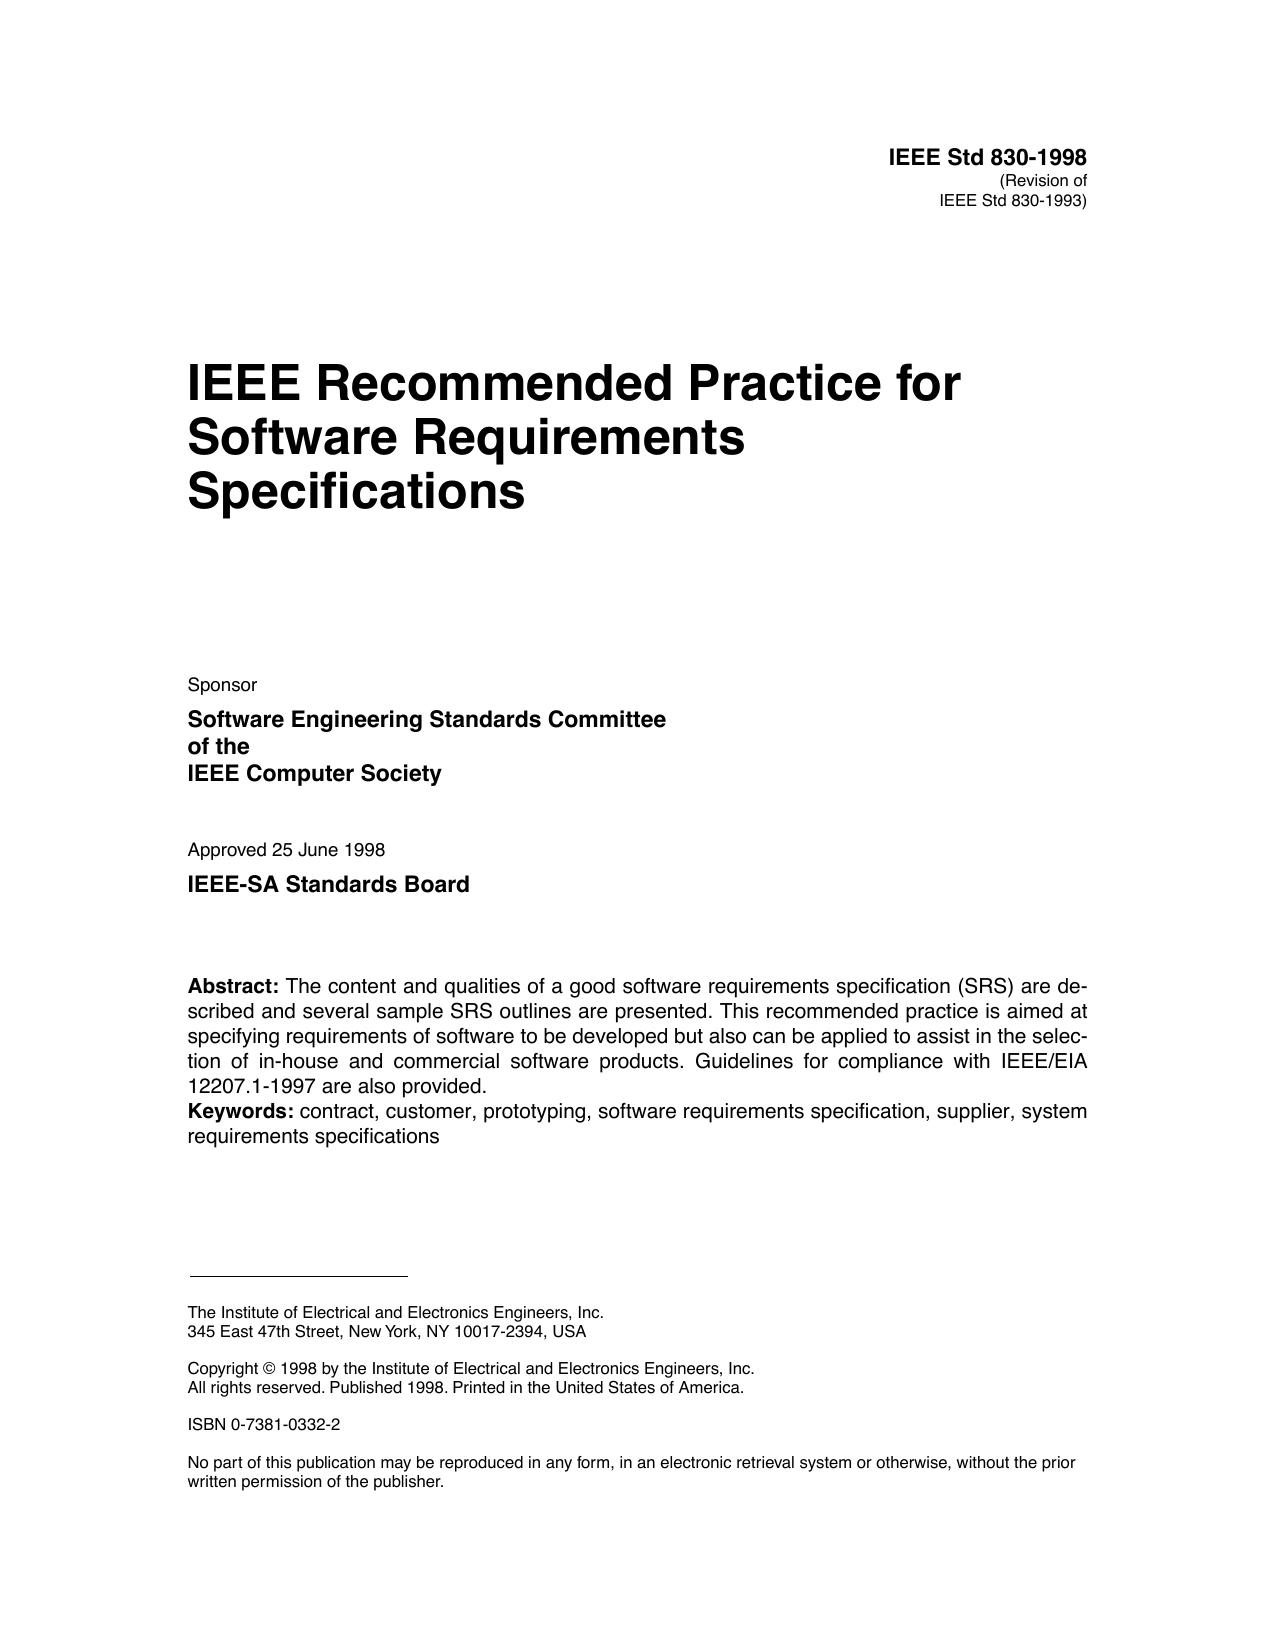 IEEE Recommended Practice For Software Requirements Speci~cations - IEEE Std 830-1998